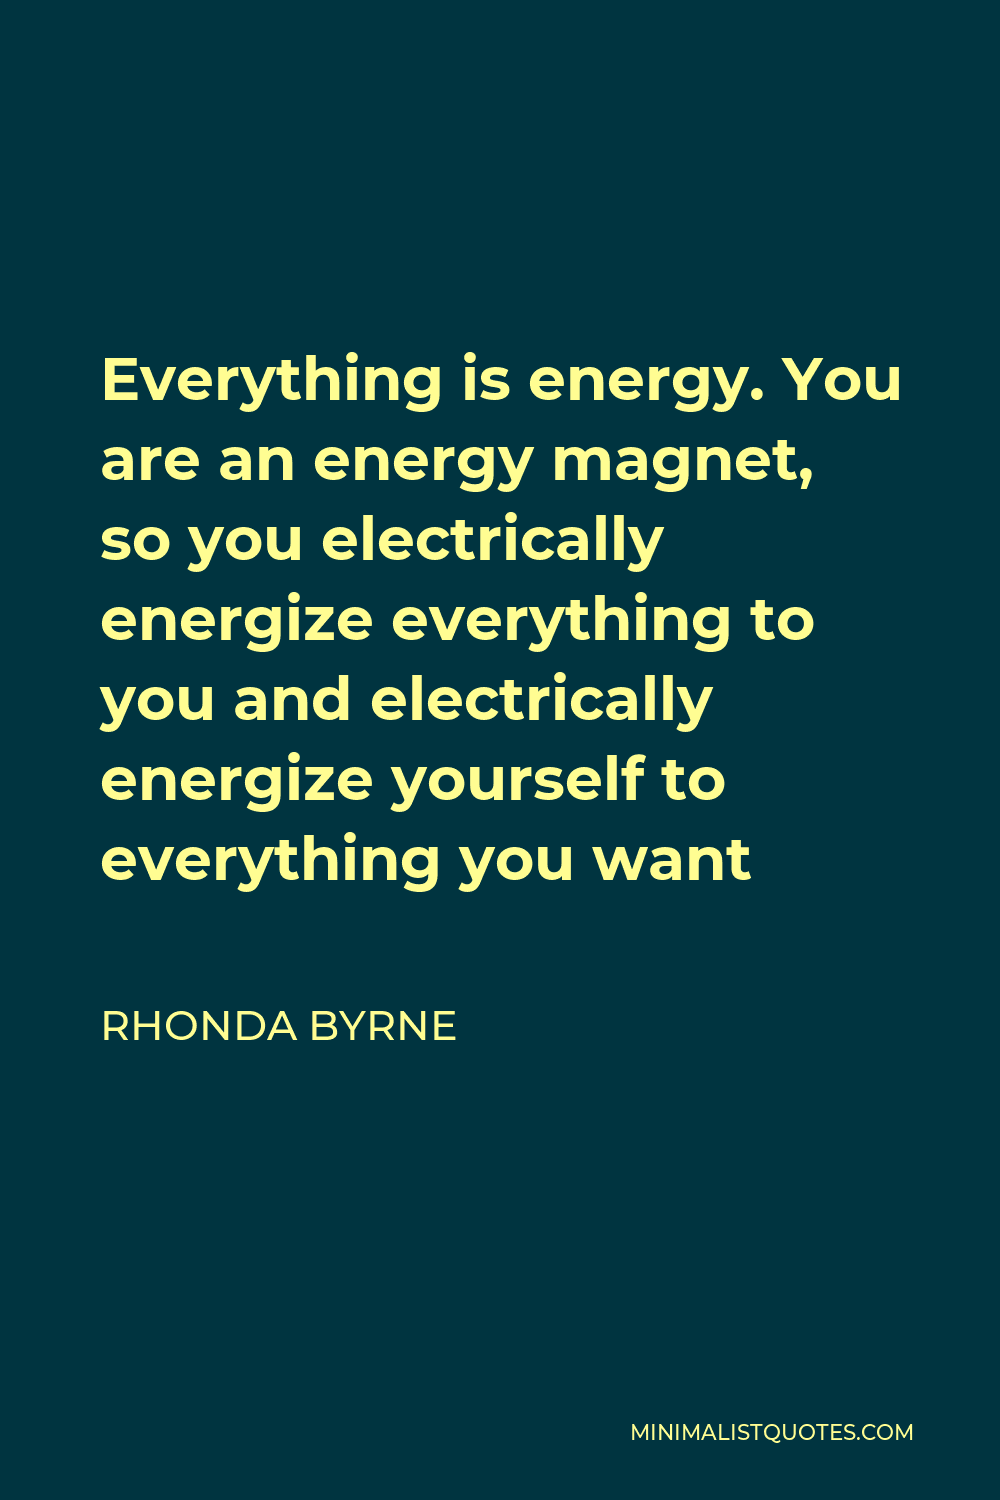 Rhonda Byrne Quote - Everything is energy. You are an energy magnet, so you electrically energize everything to you and electrically energize yourself to everything you want